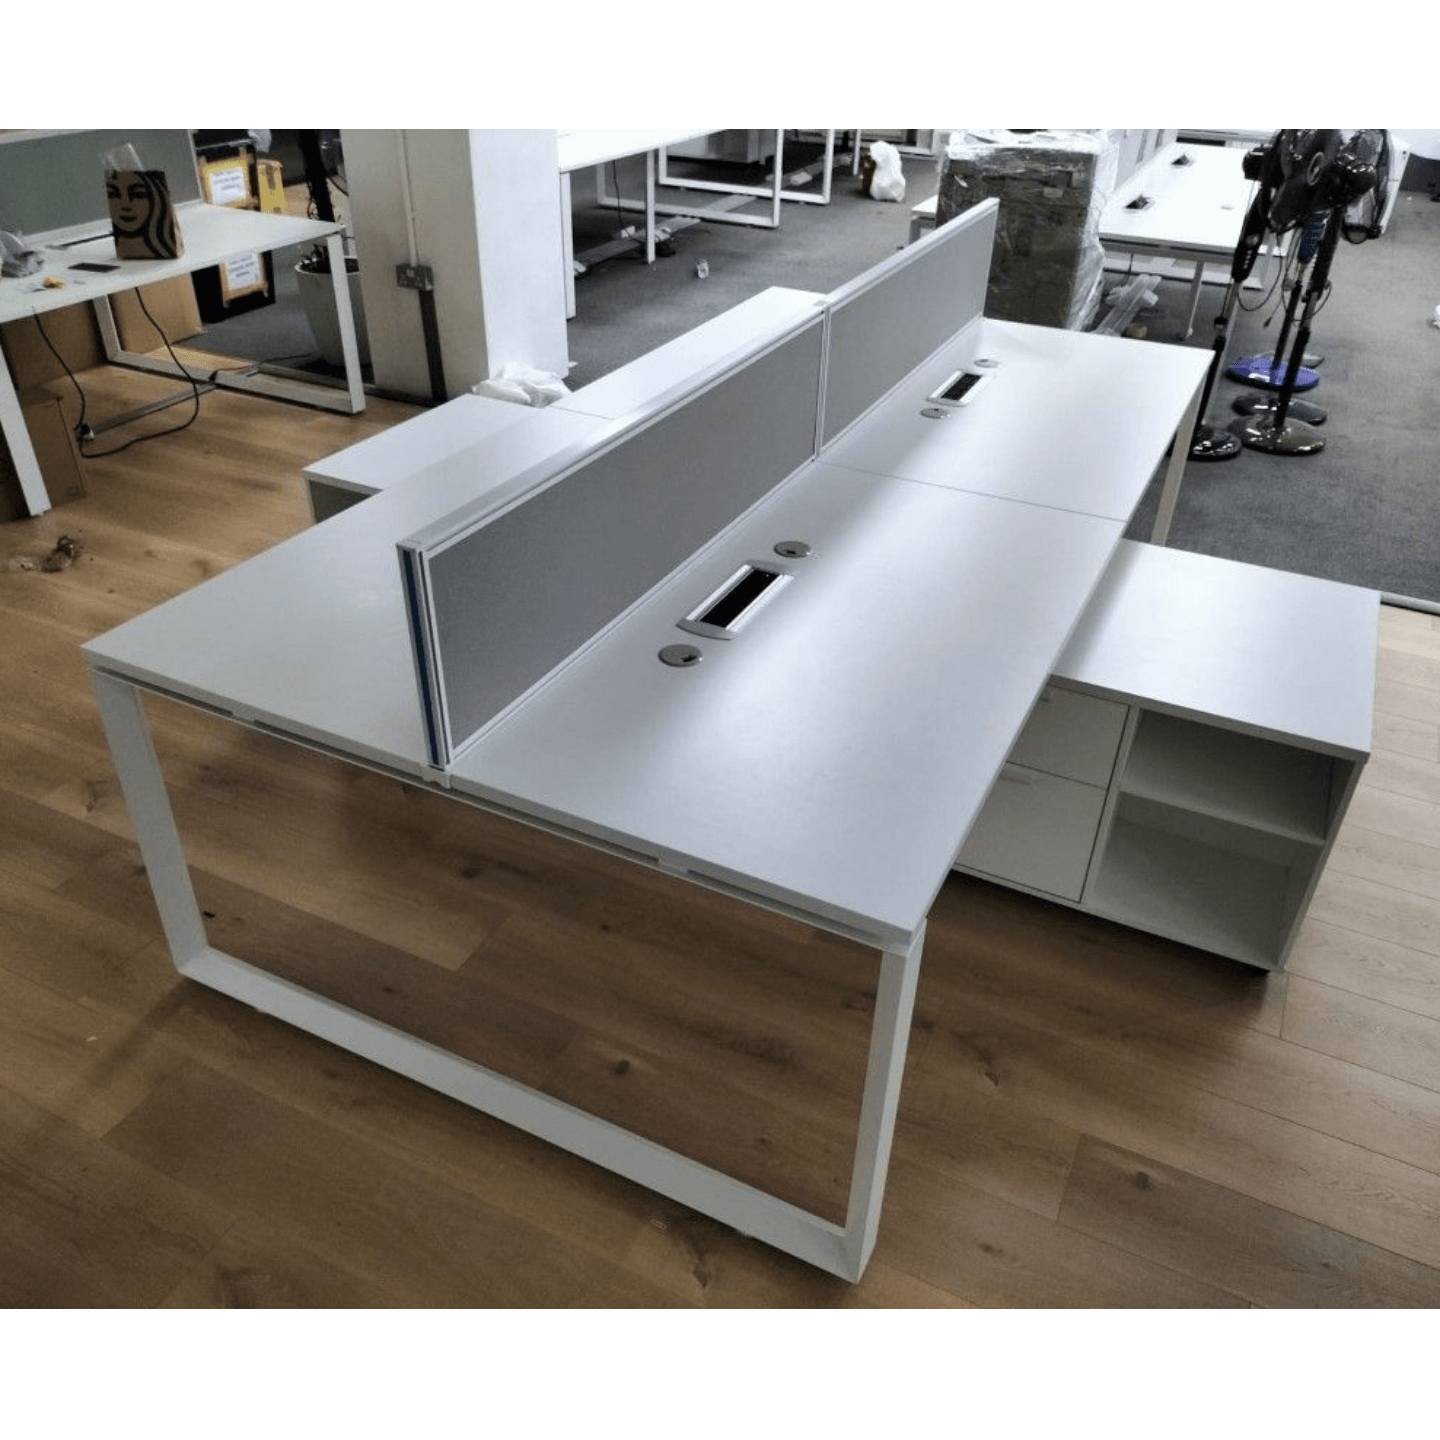 GASLEY Office System Table with Divider and Pedestal in WHITE Sits 4